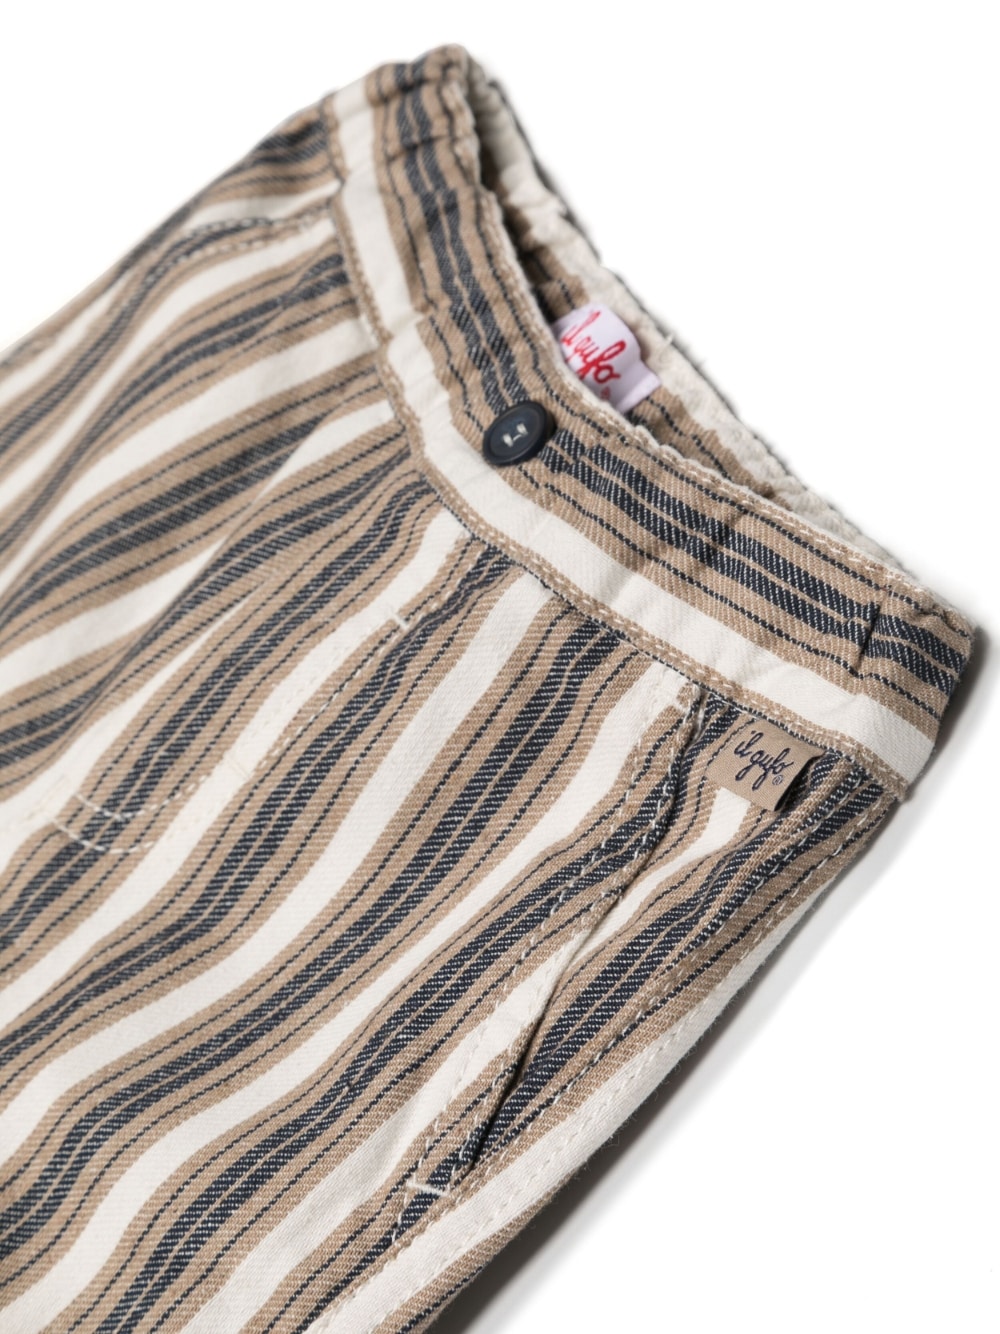 Beige and brown shorts for newborns